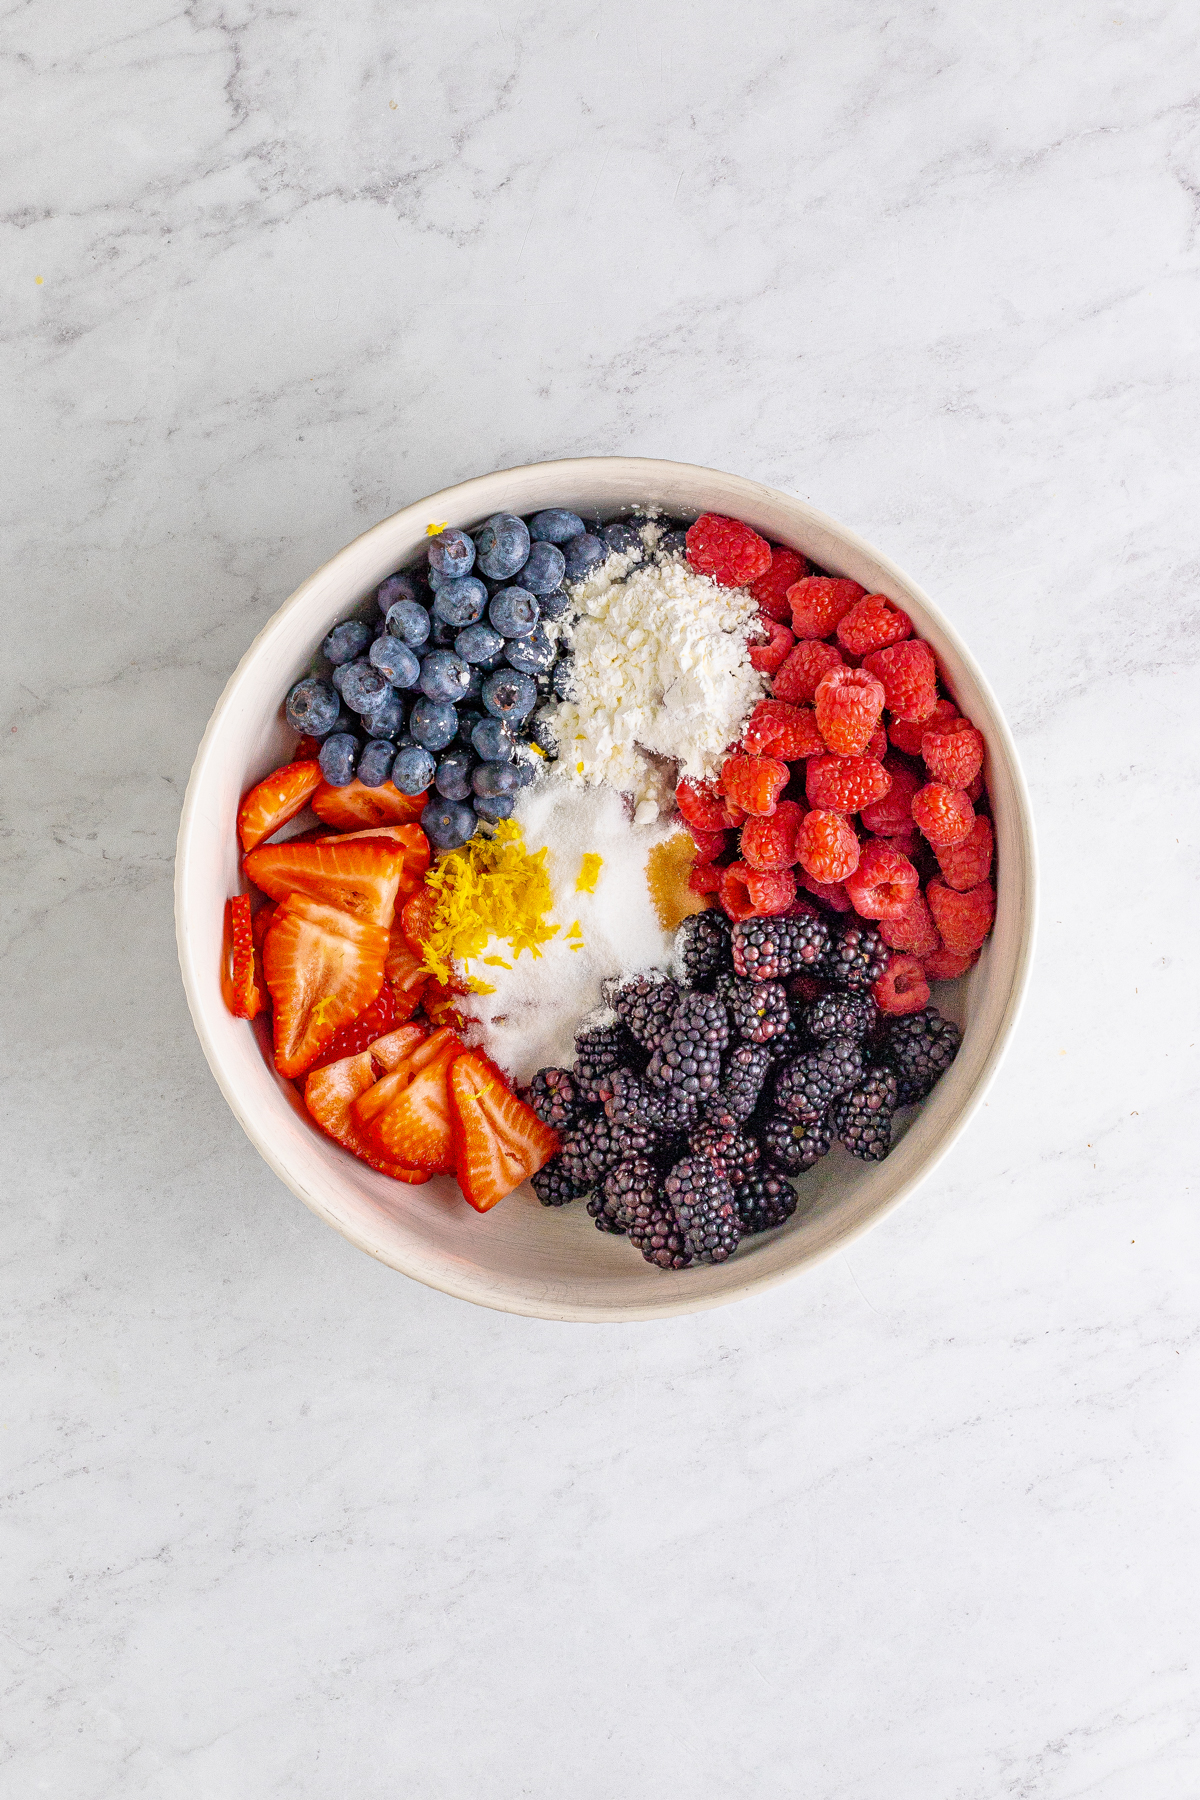 white bowl with berries and other ingredients in it